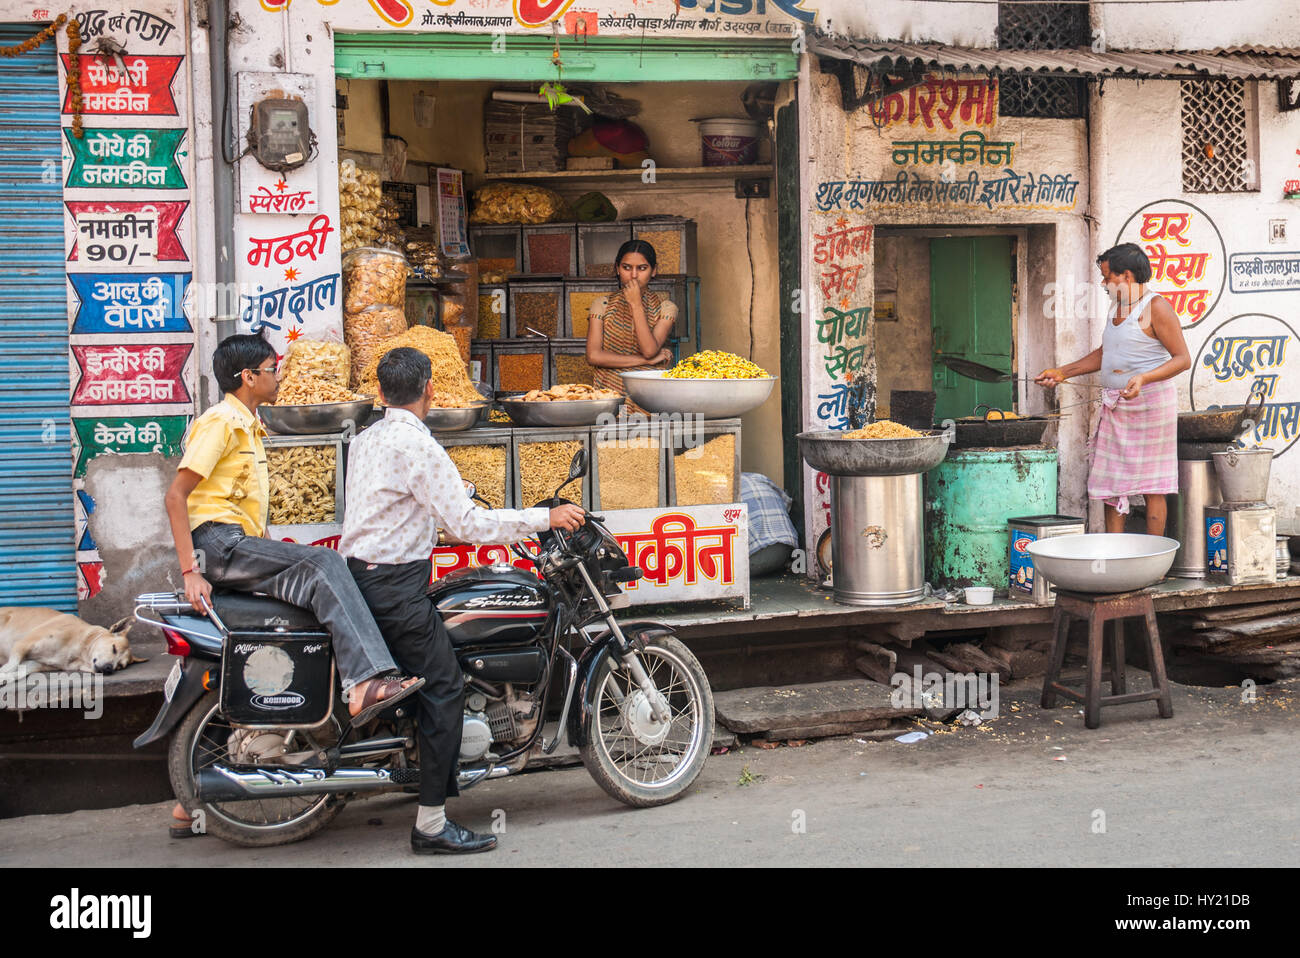 A motorbike pulls up outside a Chaat stall selling fried savoury Indian snacks, Udaipur Stock Photo